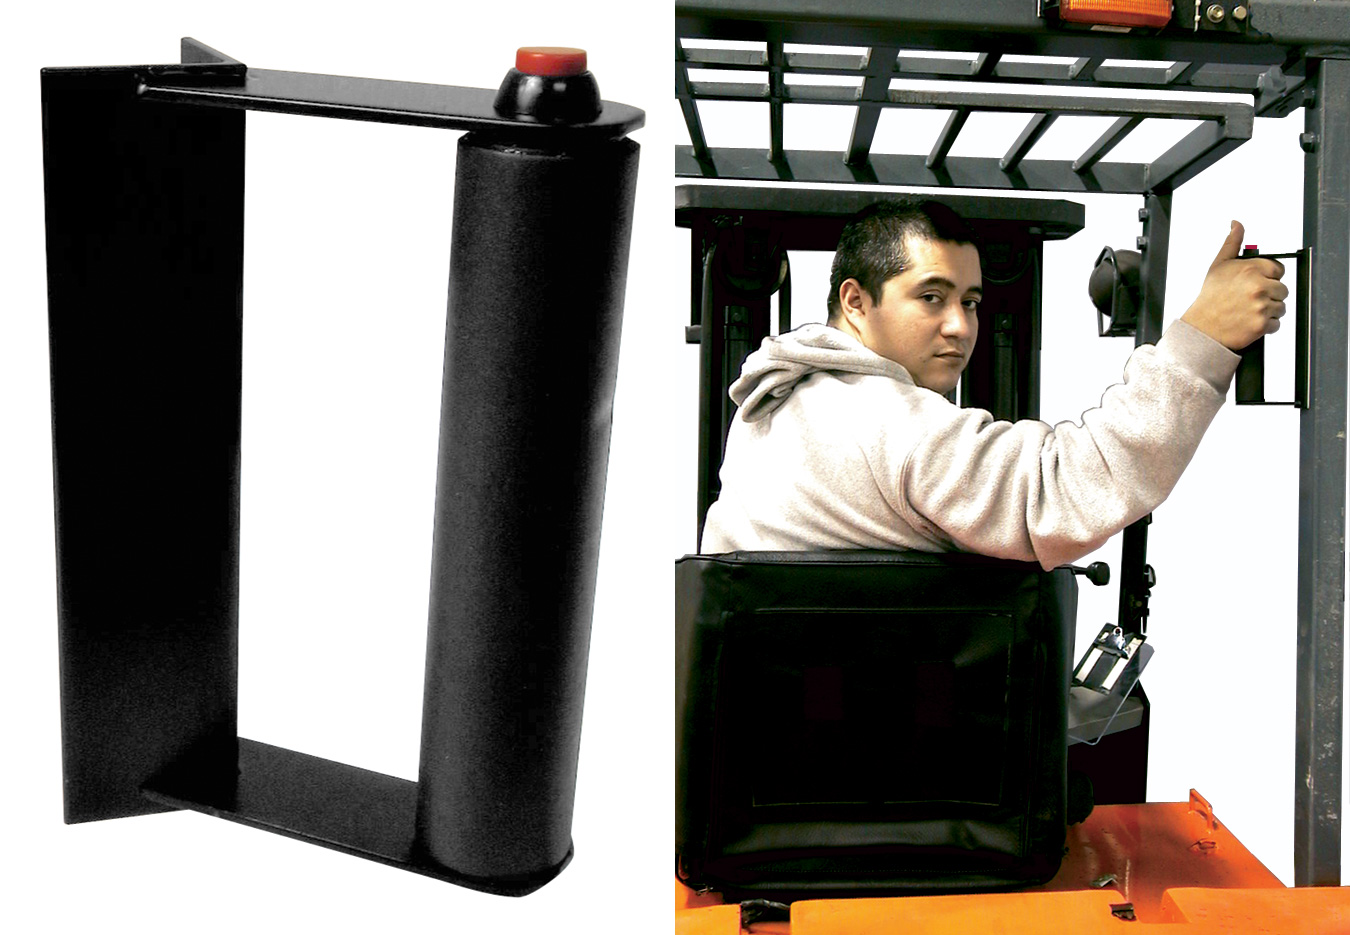 Ergo Forklift Back-Up Handle with Horn Button